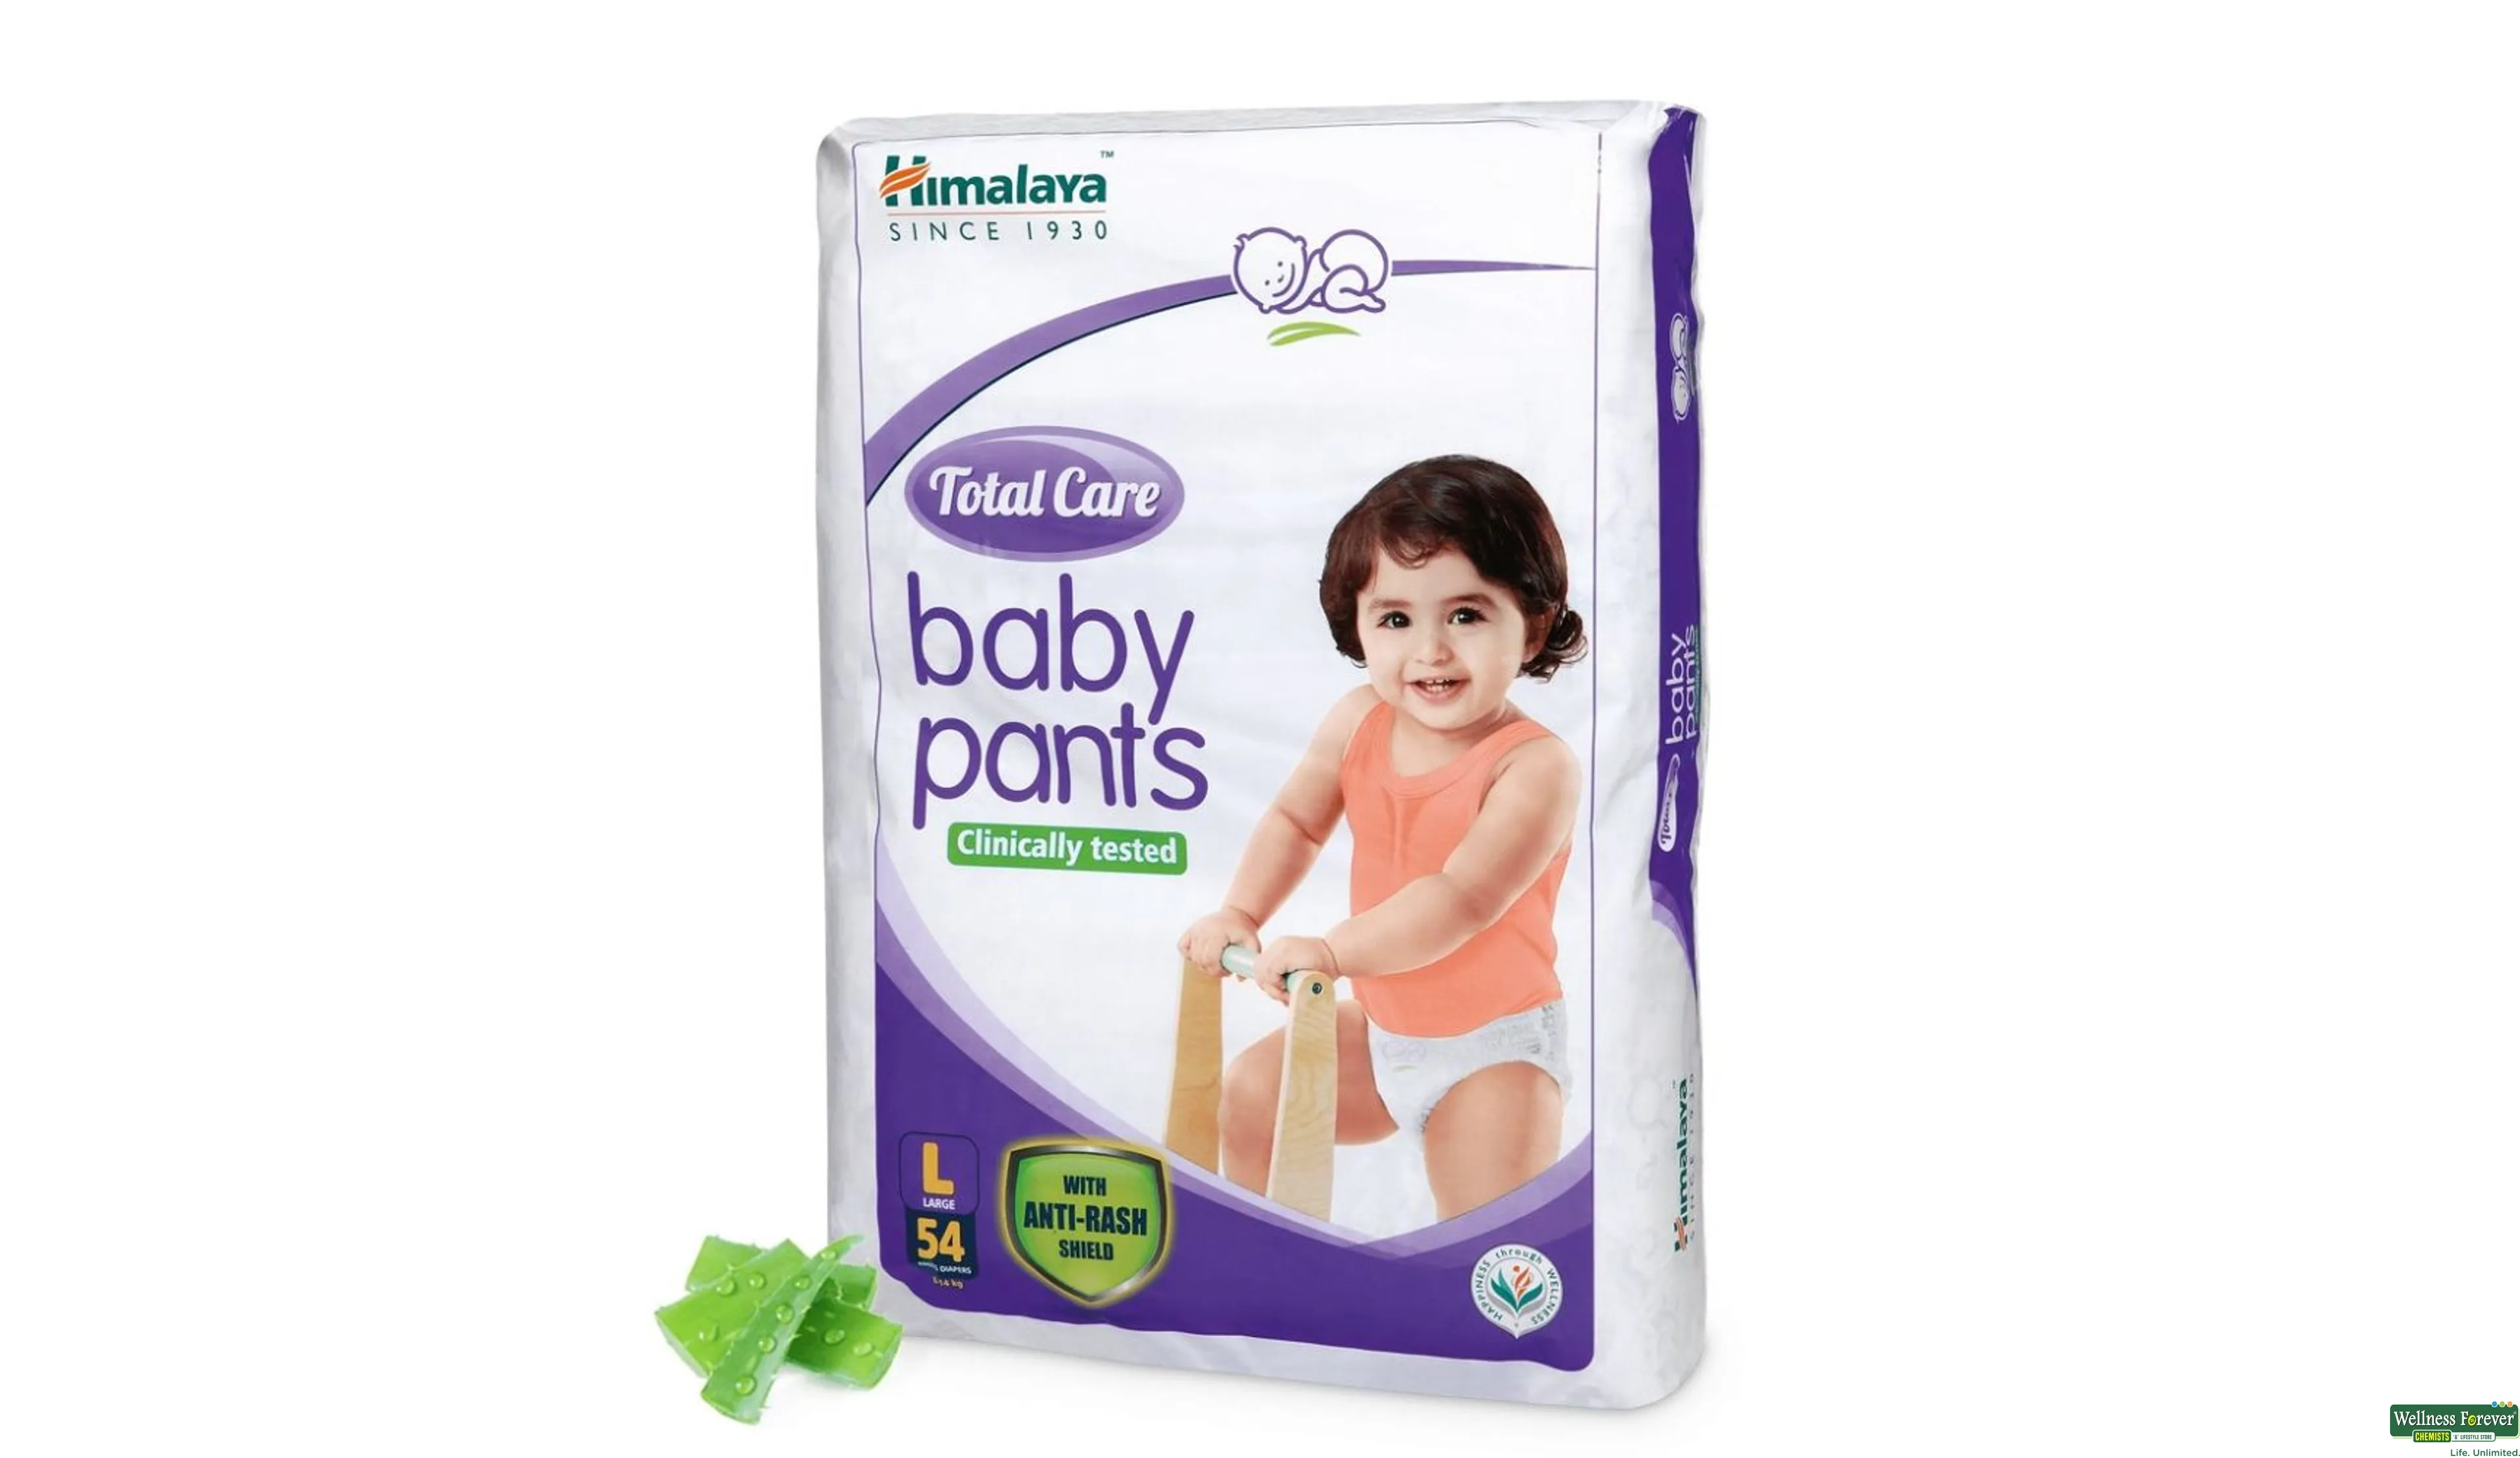 Himalaya Total Care Baby Pants Diapers With AntiRash Shield Extra Large 54  Pieces Online in India, Buy at Best Price from Firstcry.com - 1472071